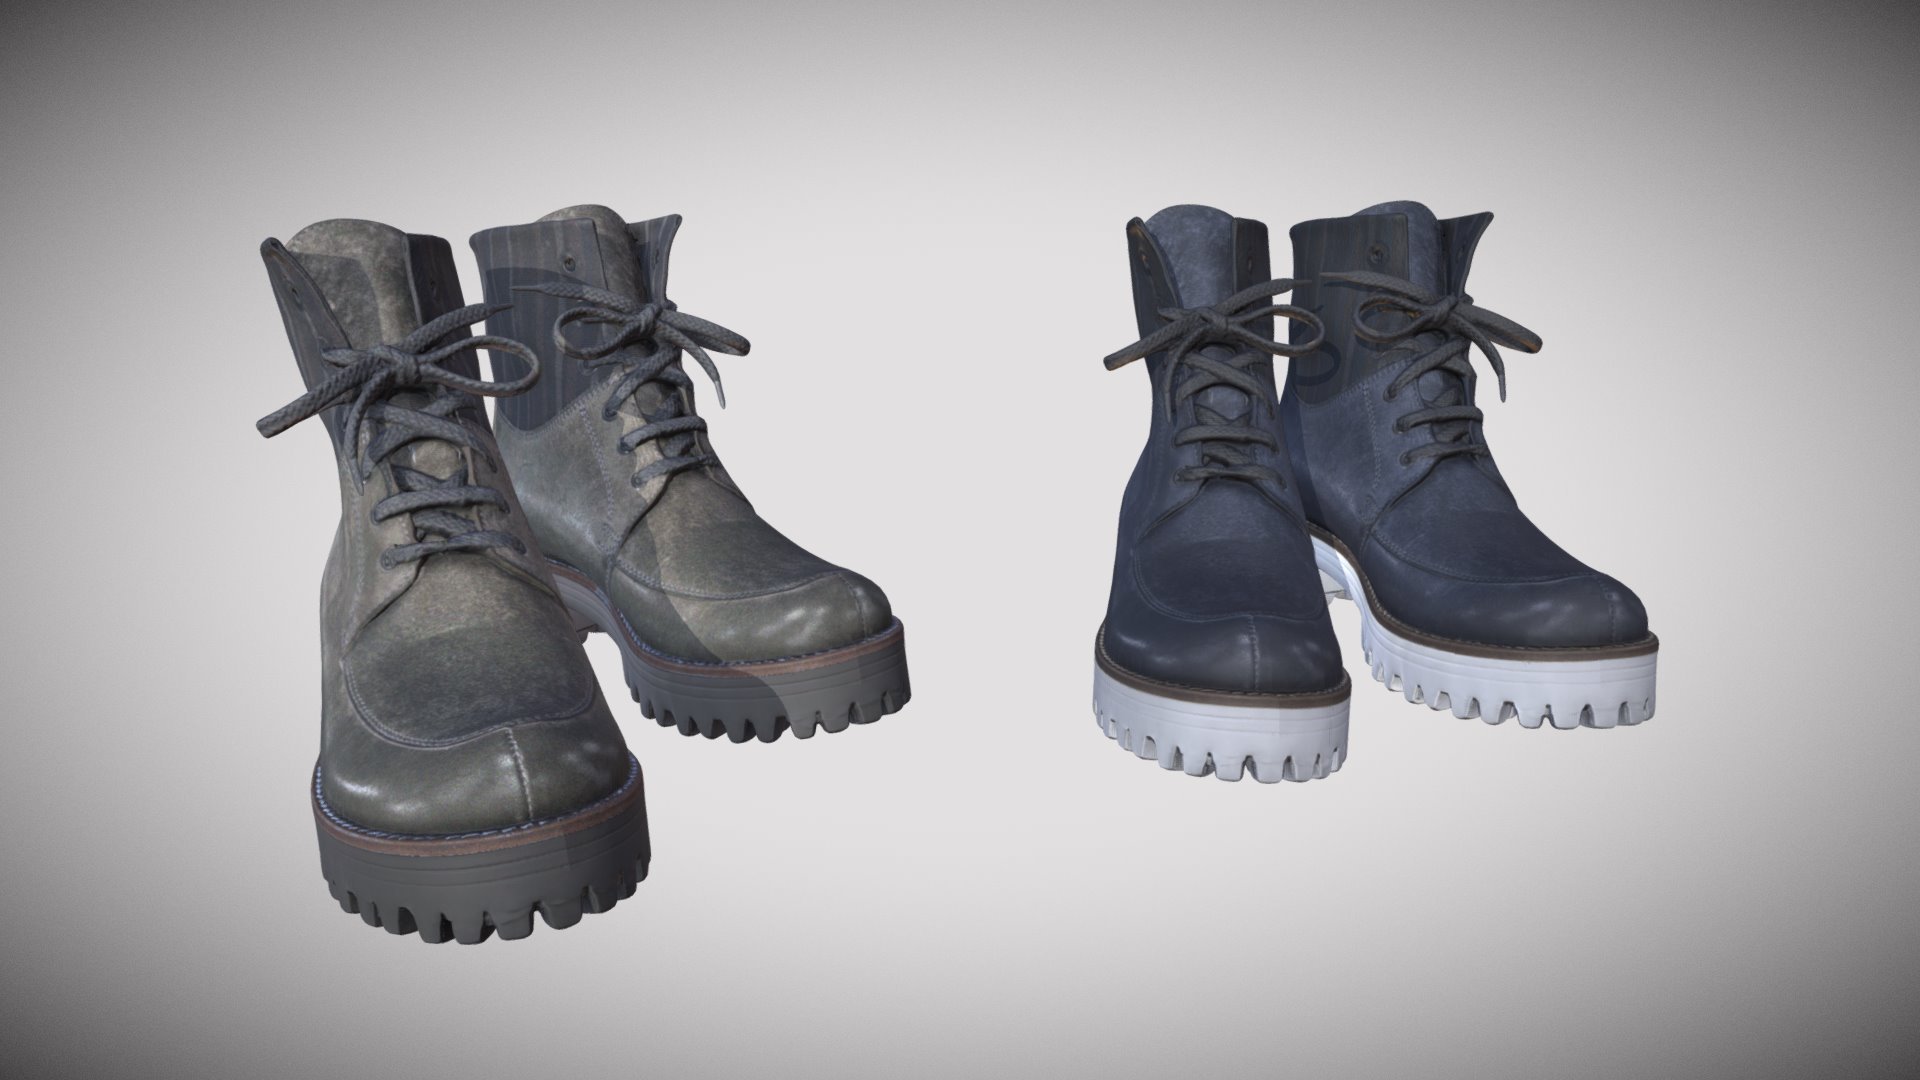 From a nice 3D Scan of Center Additive Manufacturing , Artec 3D is working super good......
Here the Low Poly version - Strong Shoes - 3D model by Francesco Coldesina (@topfrank2013) 3d model